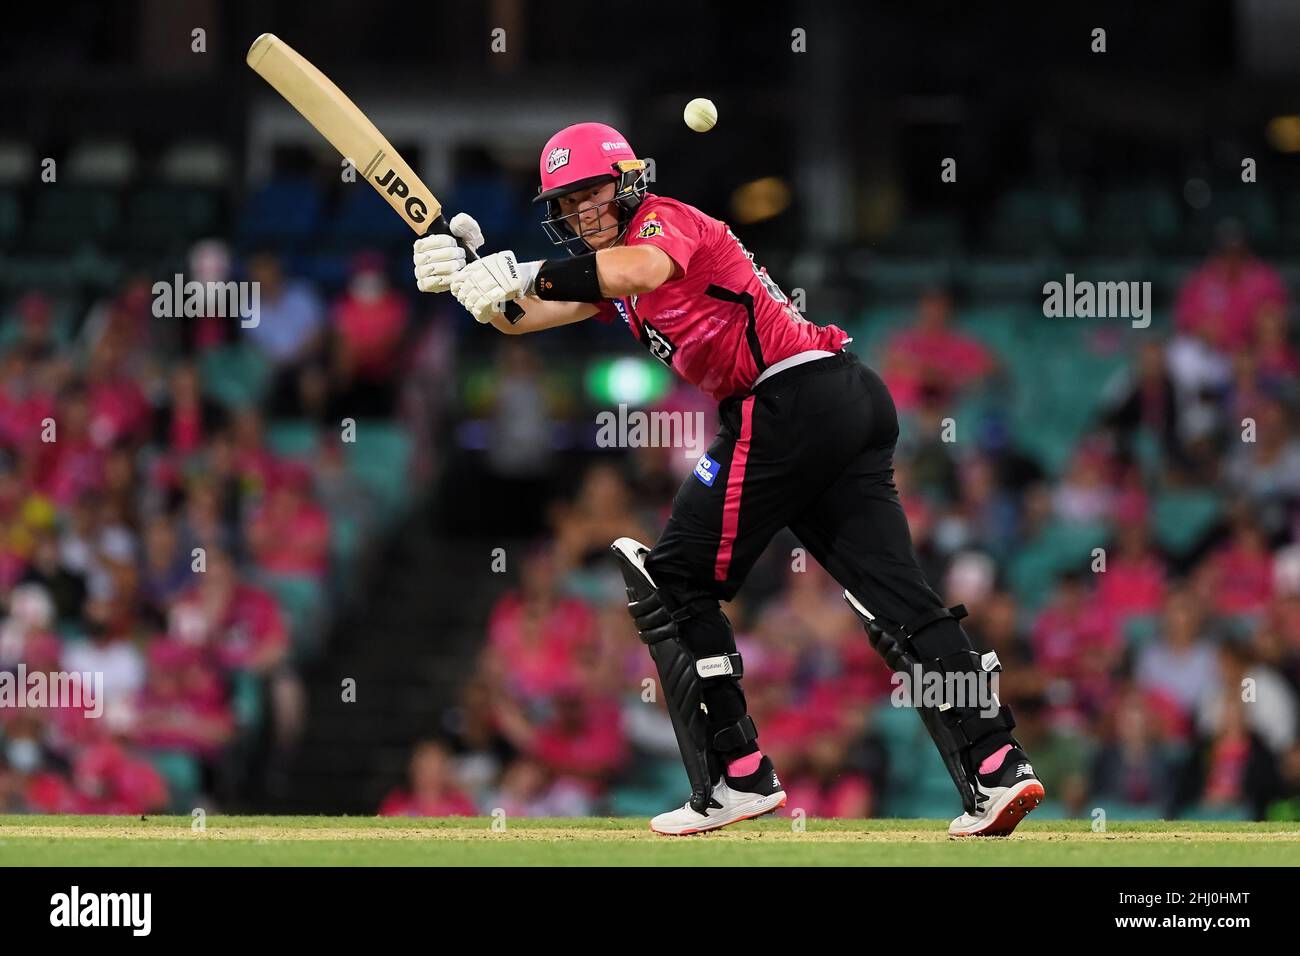 Sydney, Australia, 26 January, 2022. Moises Henriques of the Sixers hits the ball during the Big Bash League Challenger cricket match between Sydney Sixers and Adelaide Strikers at The Sydney Cricket Ground on January 26, 2022 in Sydney, Australia. Credit: Steven Markham/Speed Media/Alamy Live News Stock Photo